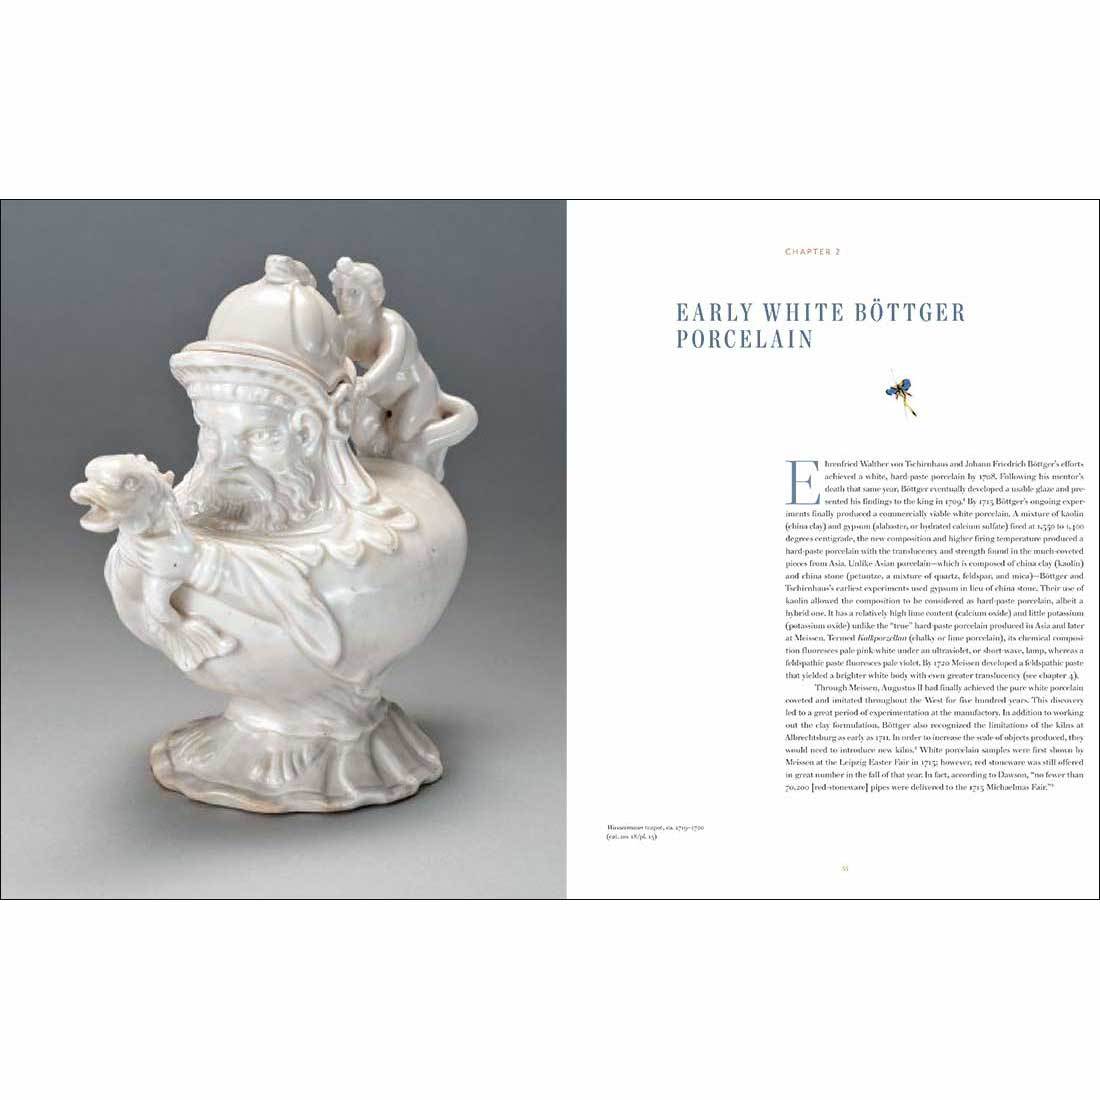 A Princely Pursuit: The Malcolm D. Gutter Collection of Early Meissen Porcelain